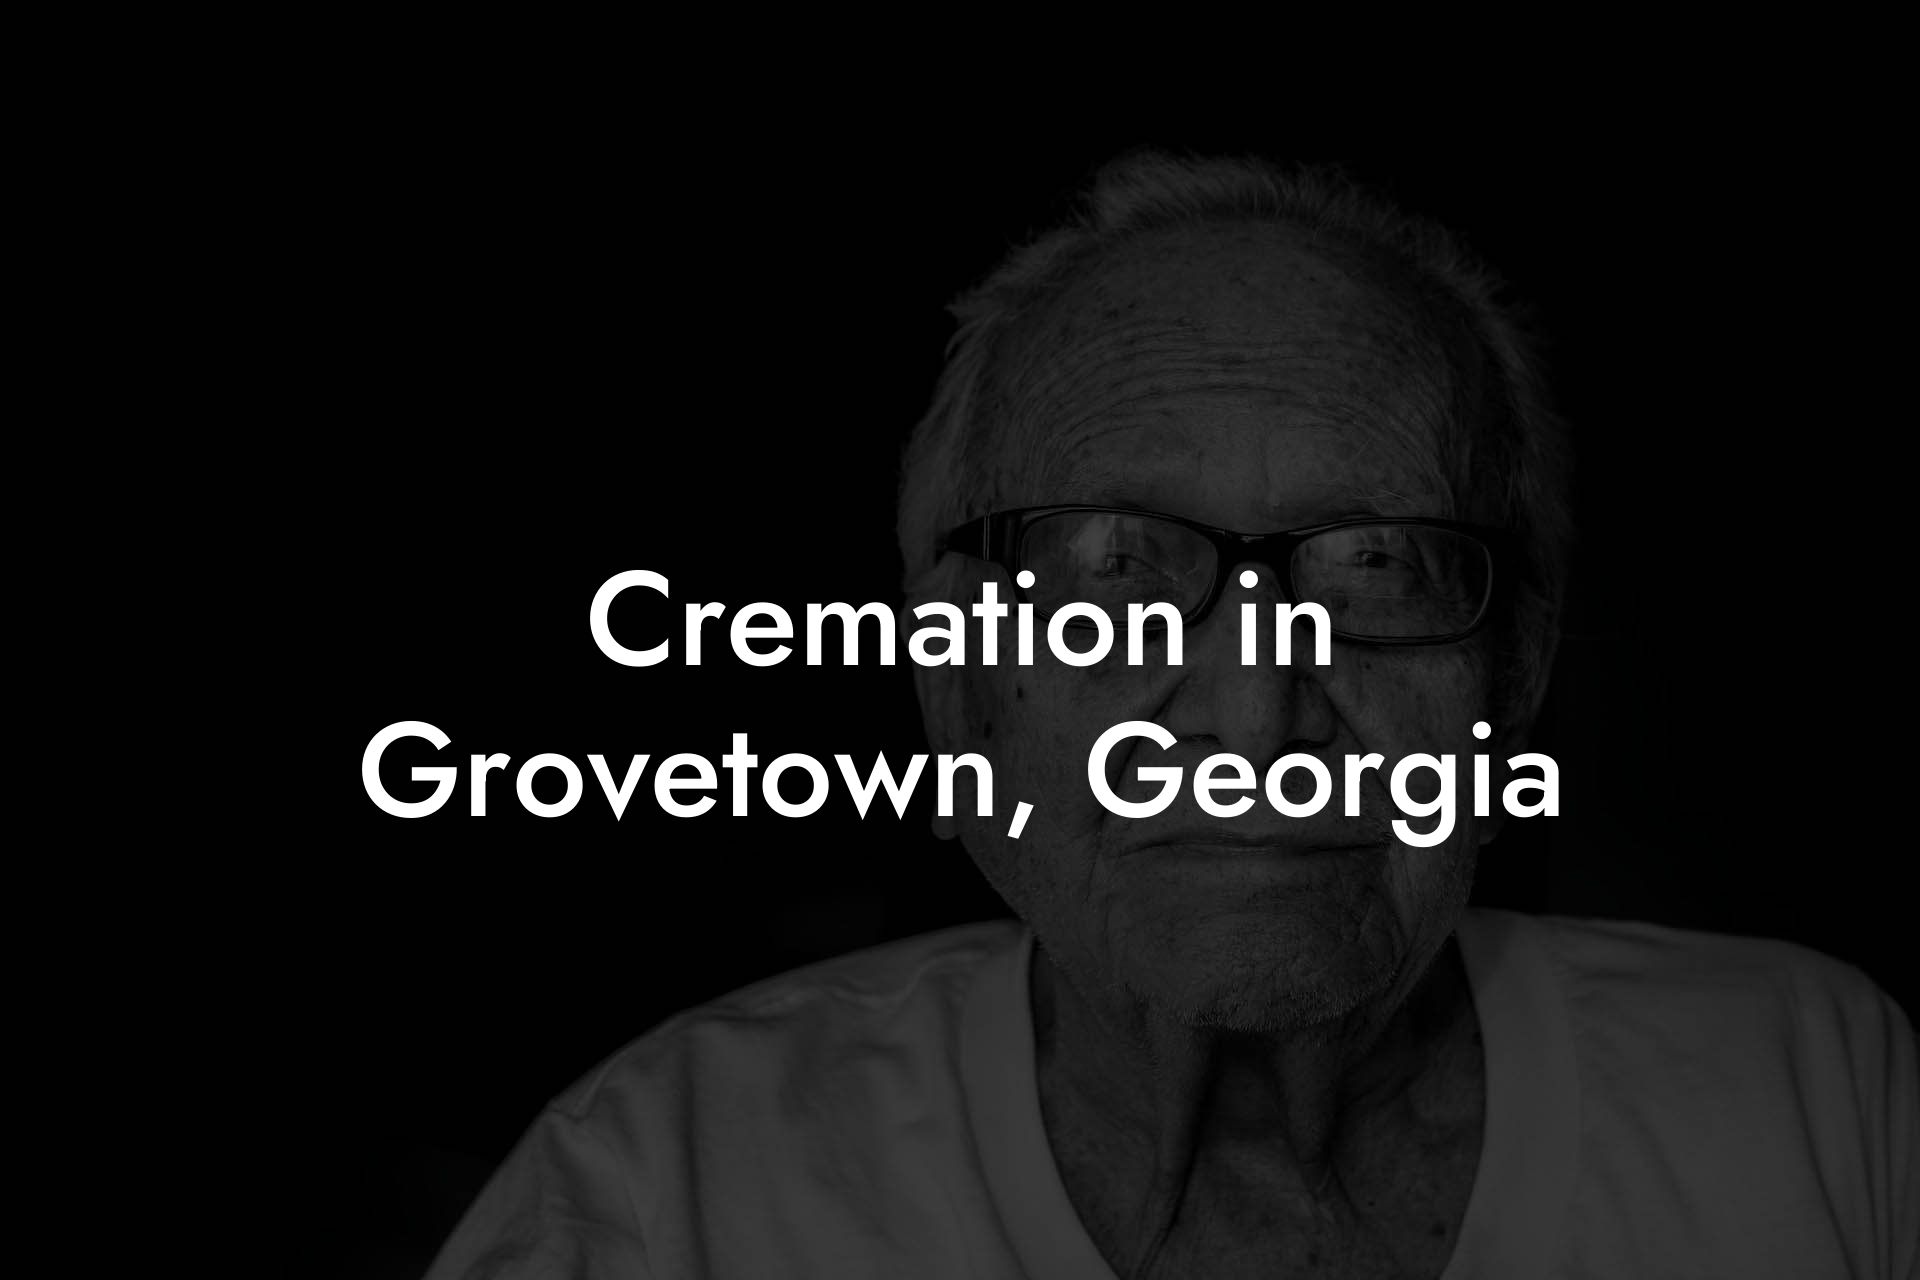 Cremation in Grovetown, Georgia